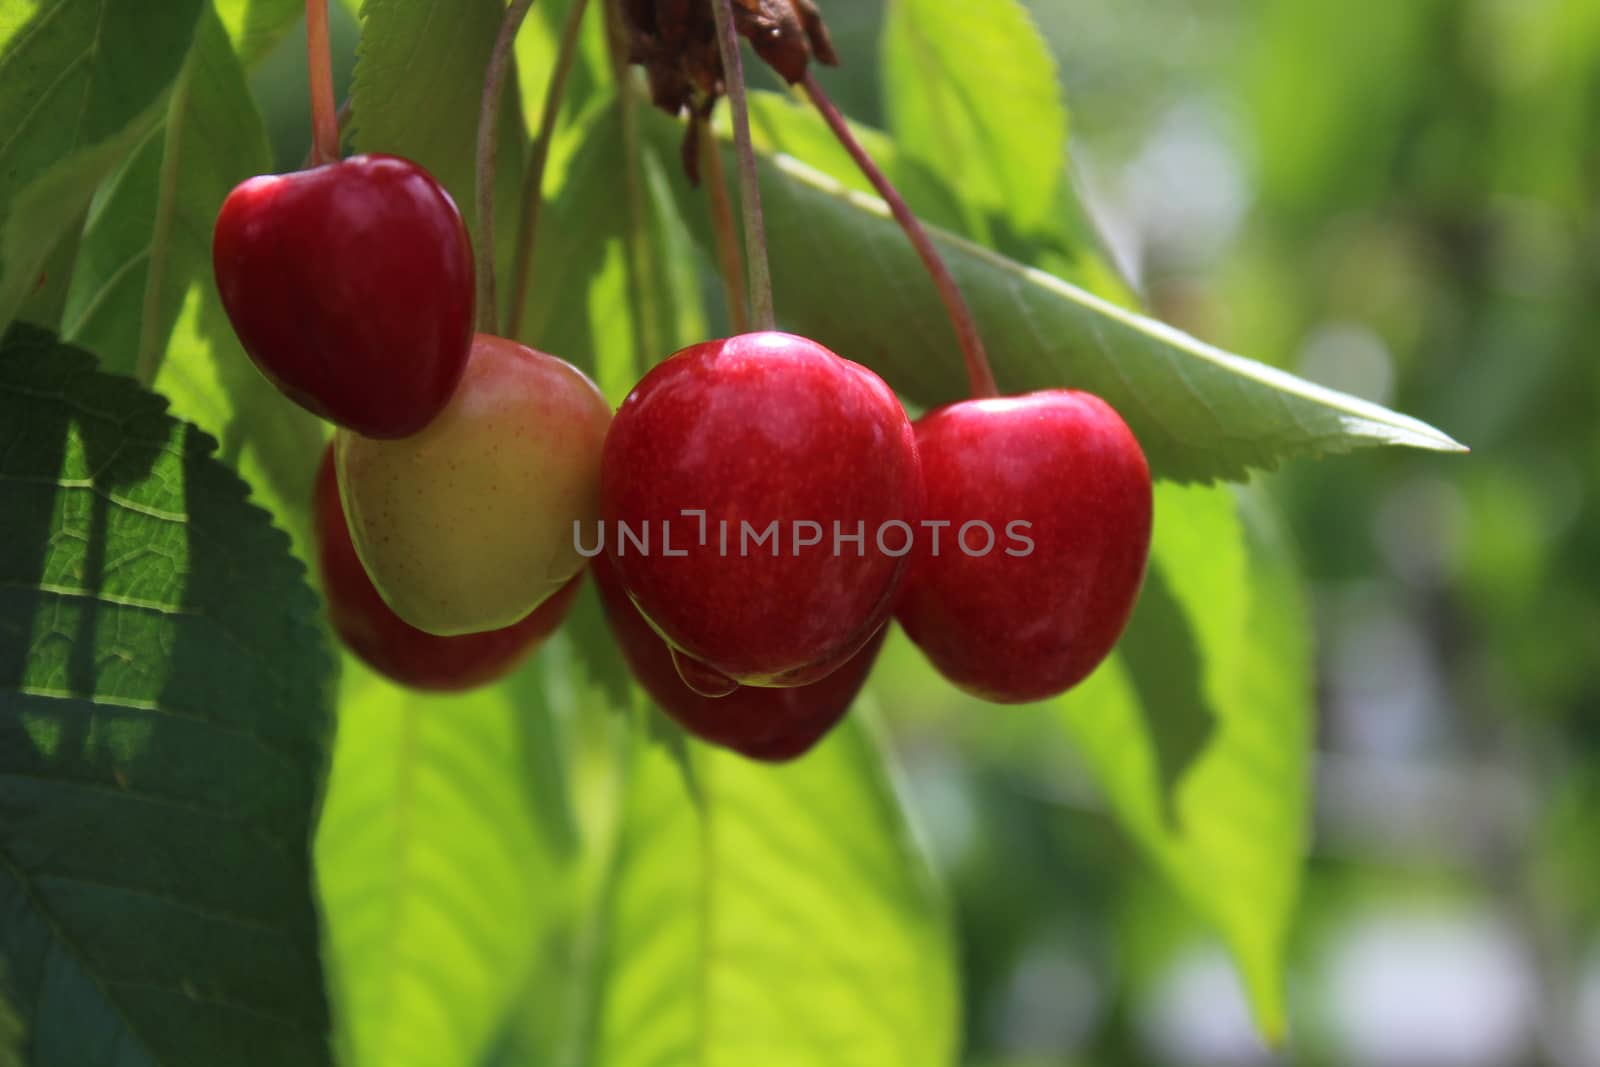 The picture shows unripe cherries on a cherry tree